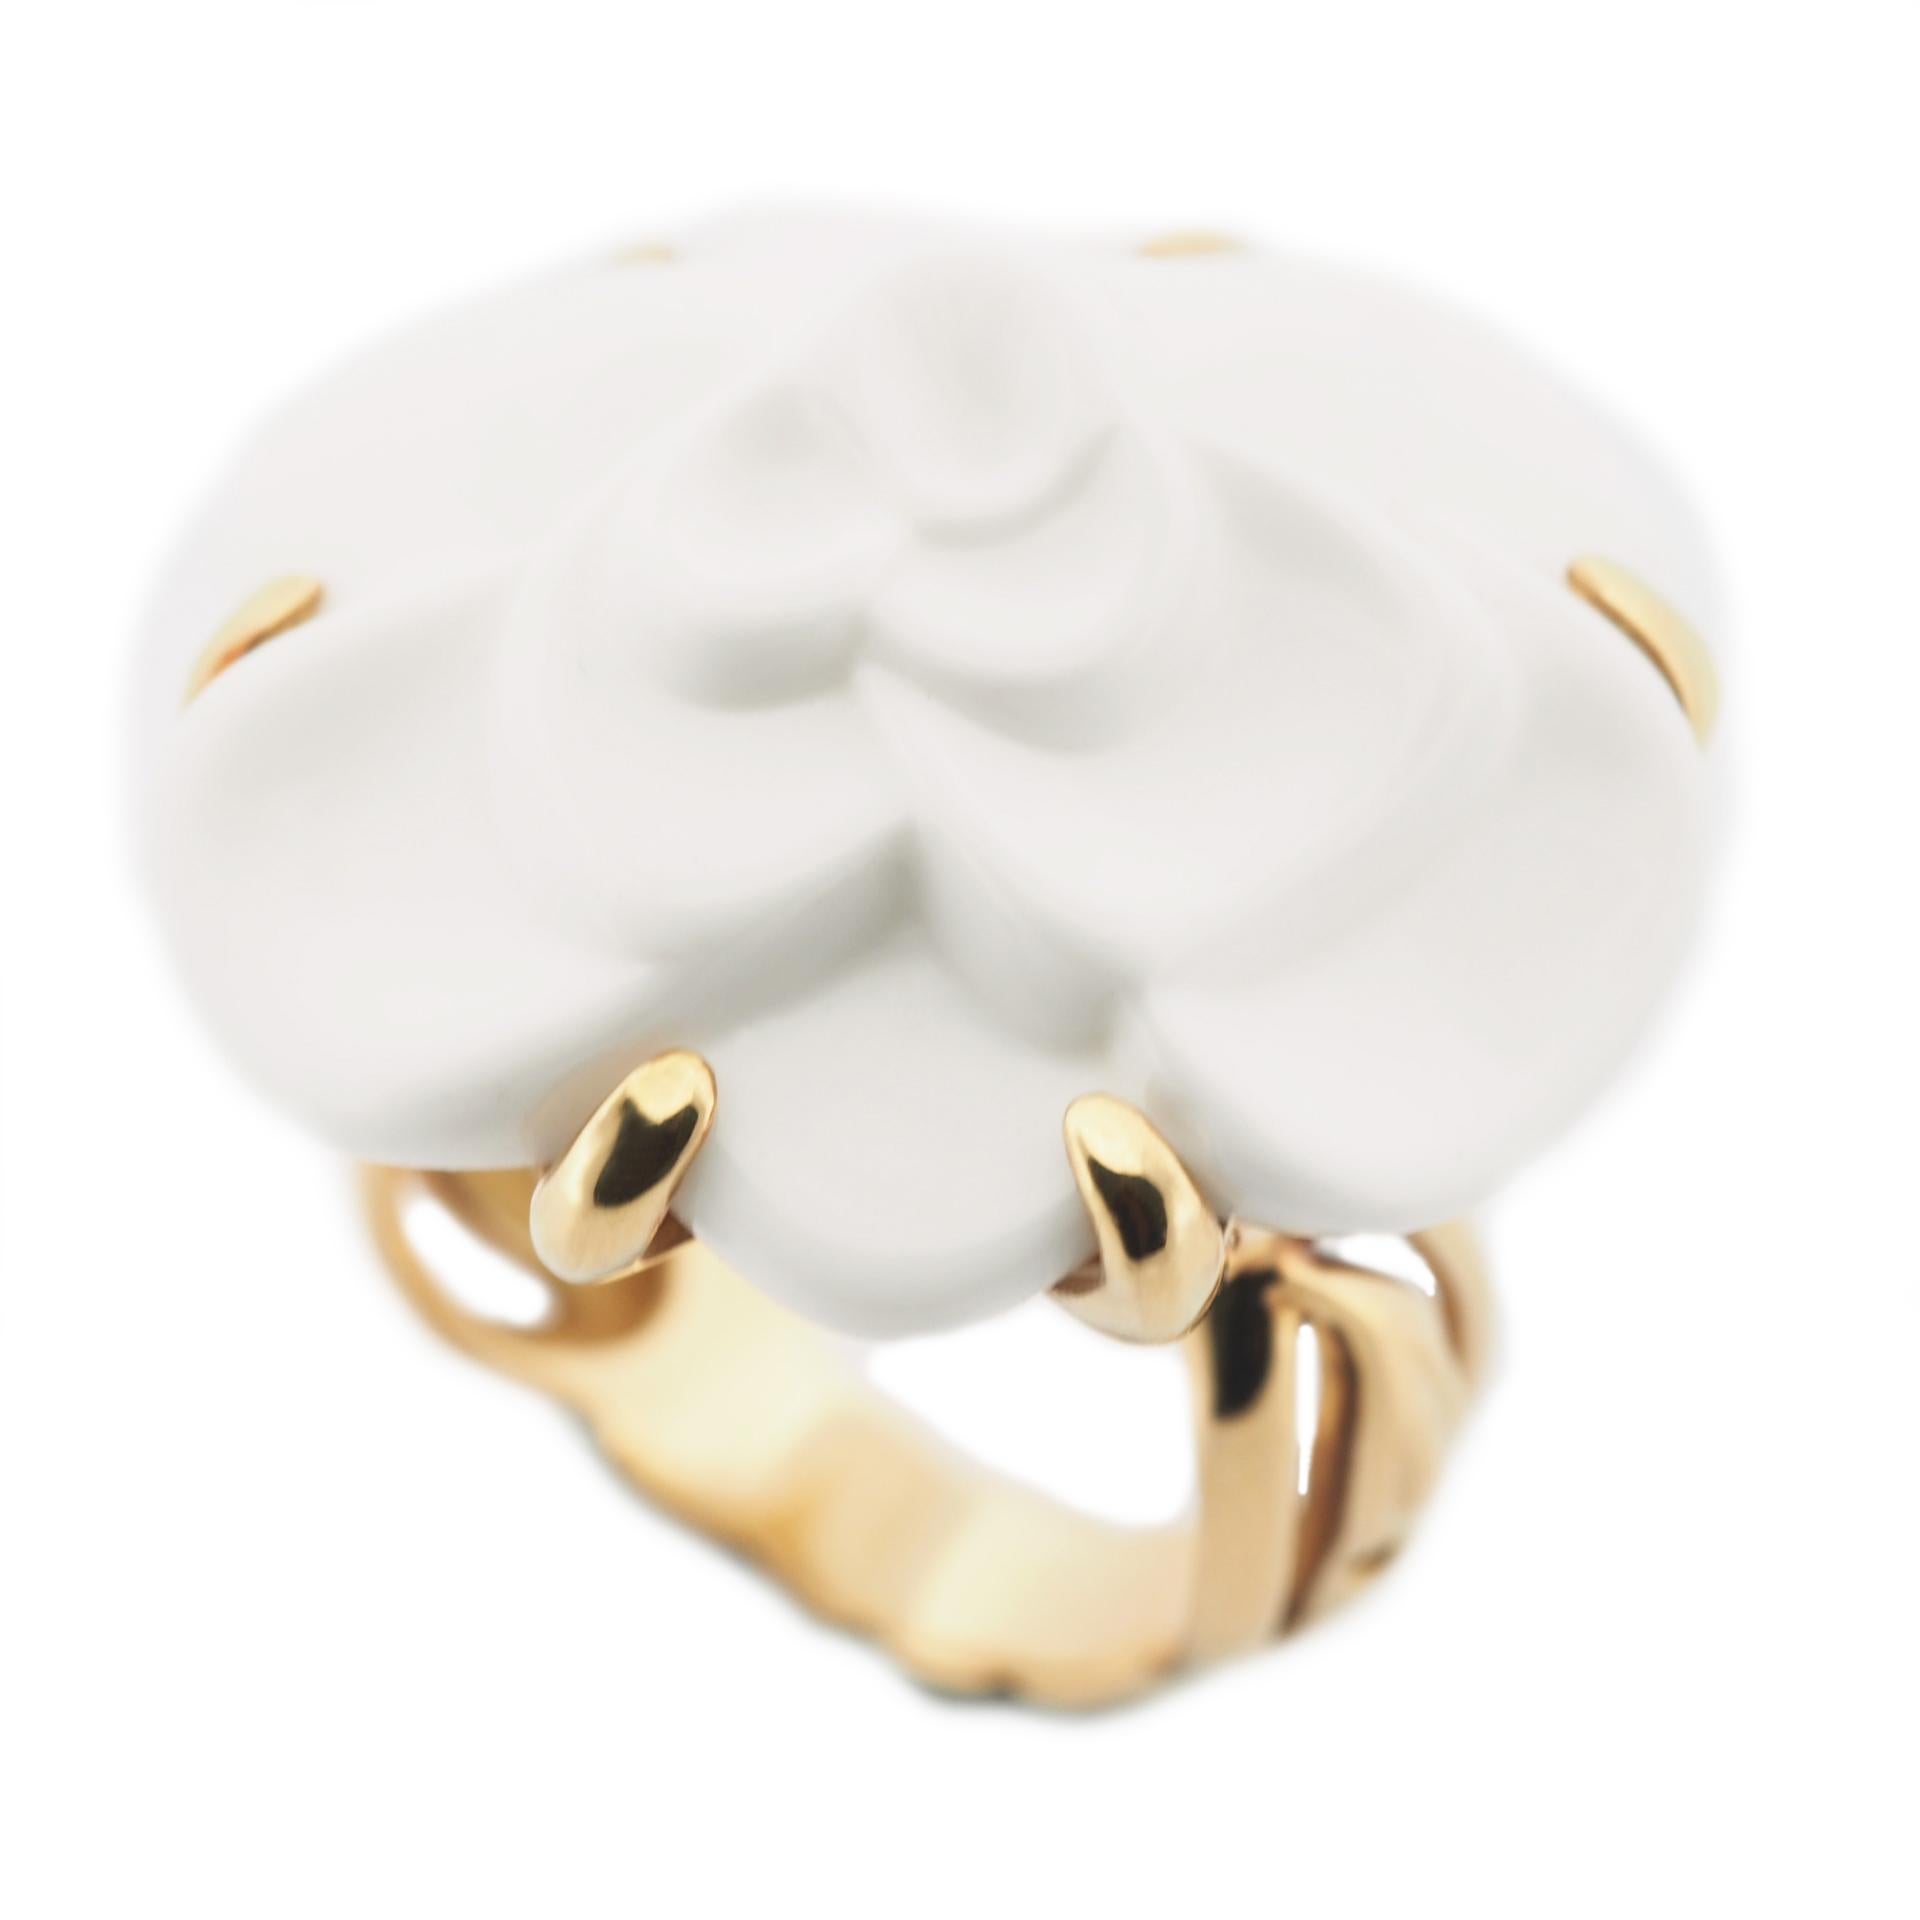 Item: Authentic Chanel Fine Jewelry Camelia Ring
Stones: Whiet Chalcedony
Metal: 18K Yellow Gold
Ring Size: 51 US SIZE 5.5 UK SIZE K 1/2
Internal Diameter:  16.15 mm
Measurement:  4 - 24 mm Width
Weight:  14.0 Grams
Condition: Used